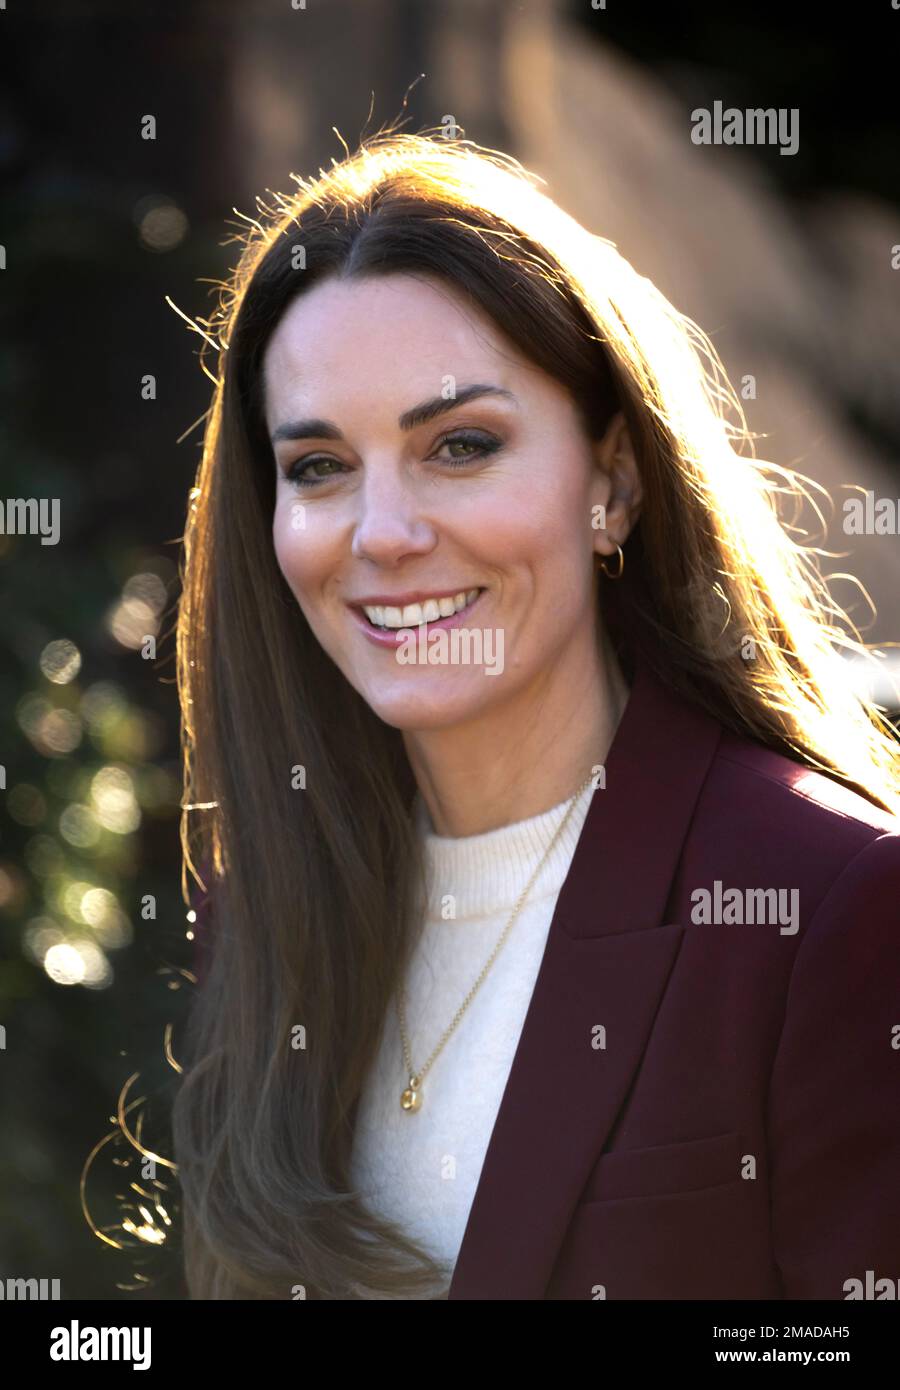 London, UK. 19th Jan, 2023. January 19th, 2023. London, UK. The Princess of Wales, Patron of the Rugby Football League, hosts a reception for the England Wheelchair Rugby League team in recognition of their success at the recent Rugby League World Cup, at Hampton Court Palace. Credit: Doug Peters/Alamy Live News Stock Photo